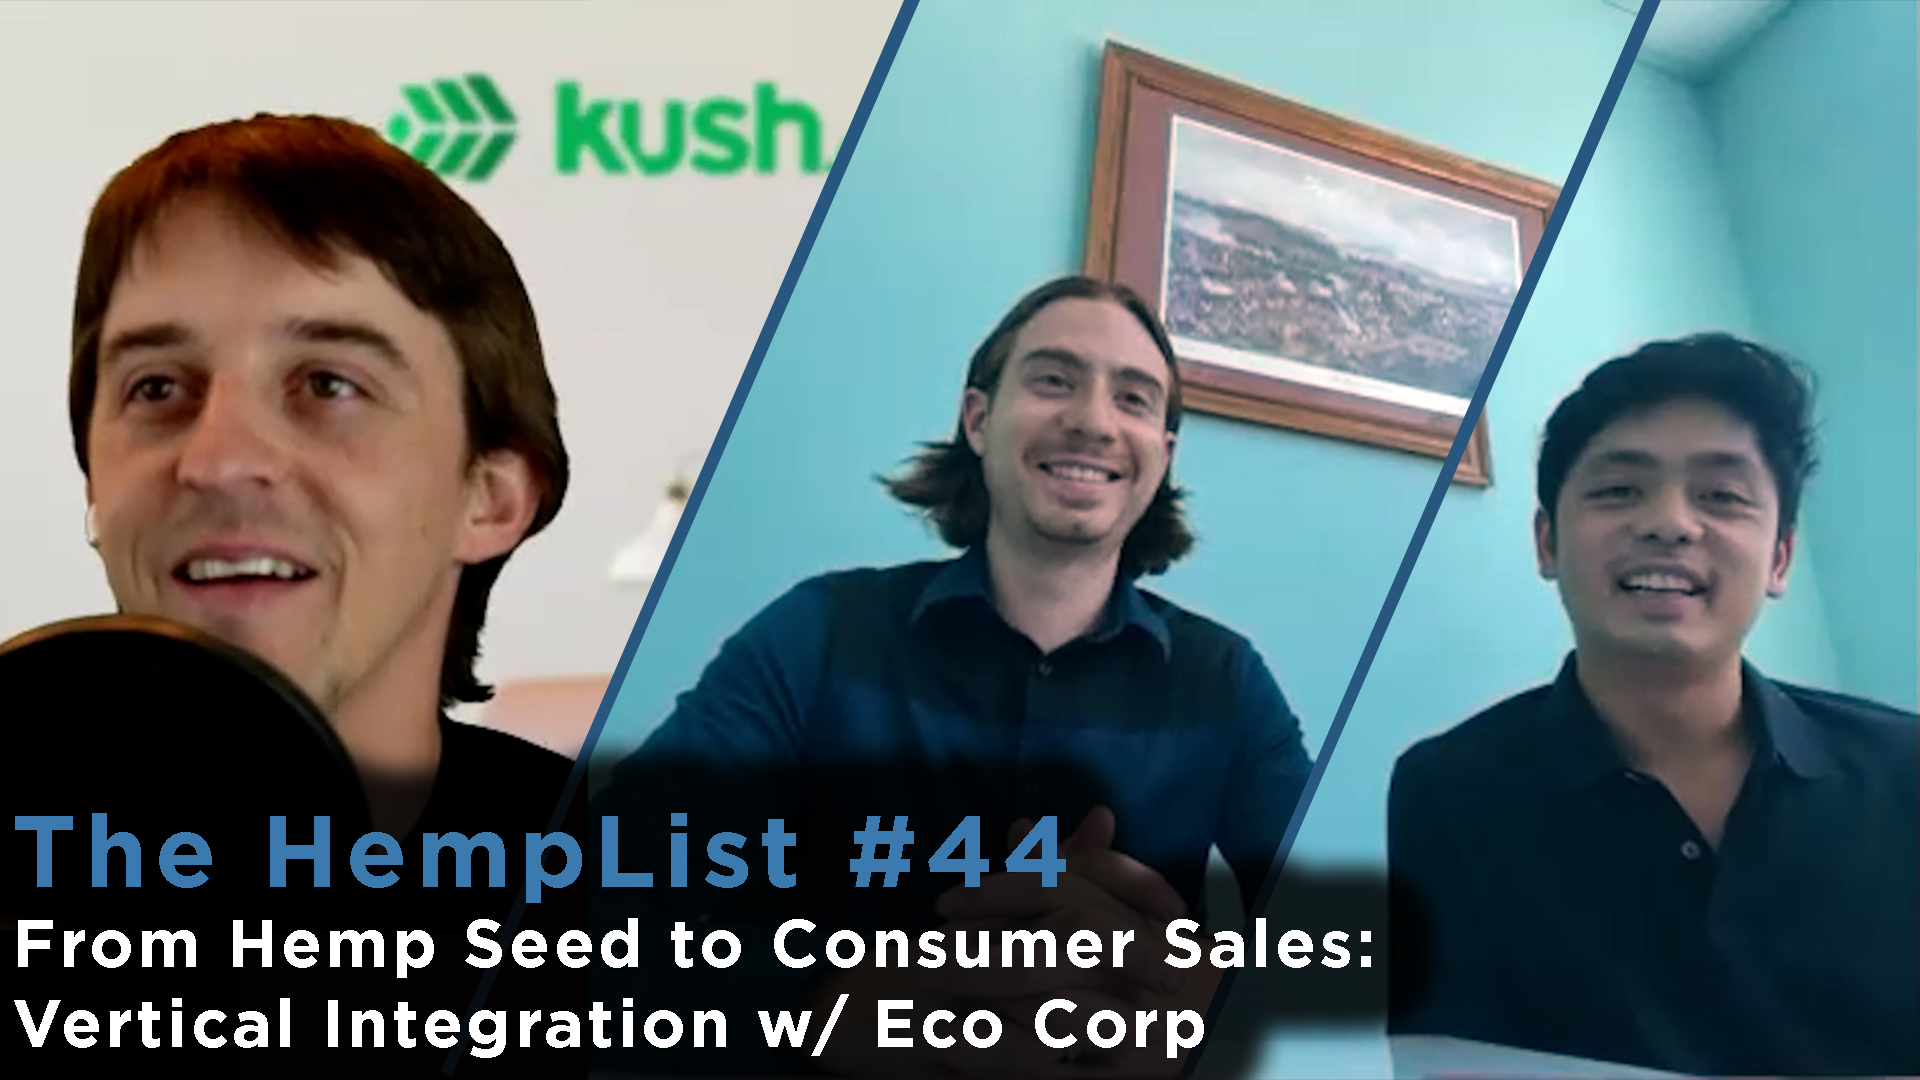 The HempList #44: From Hemp Seed to Consumer Sales: Vertical Integration w/ Eco Corp